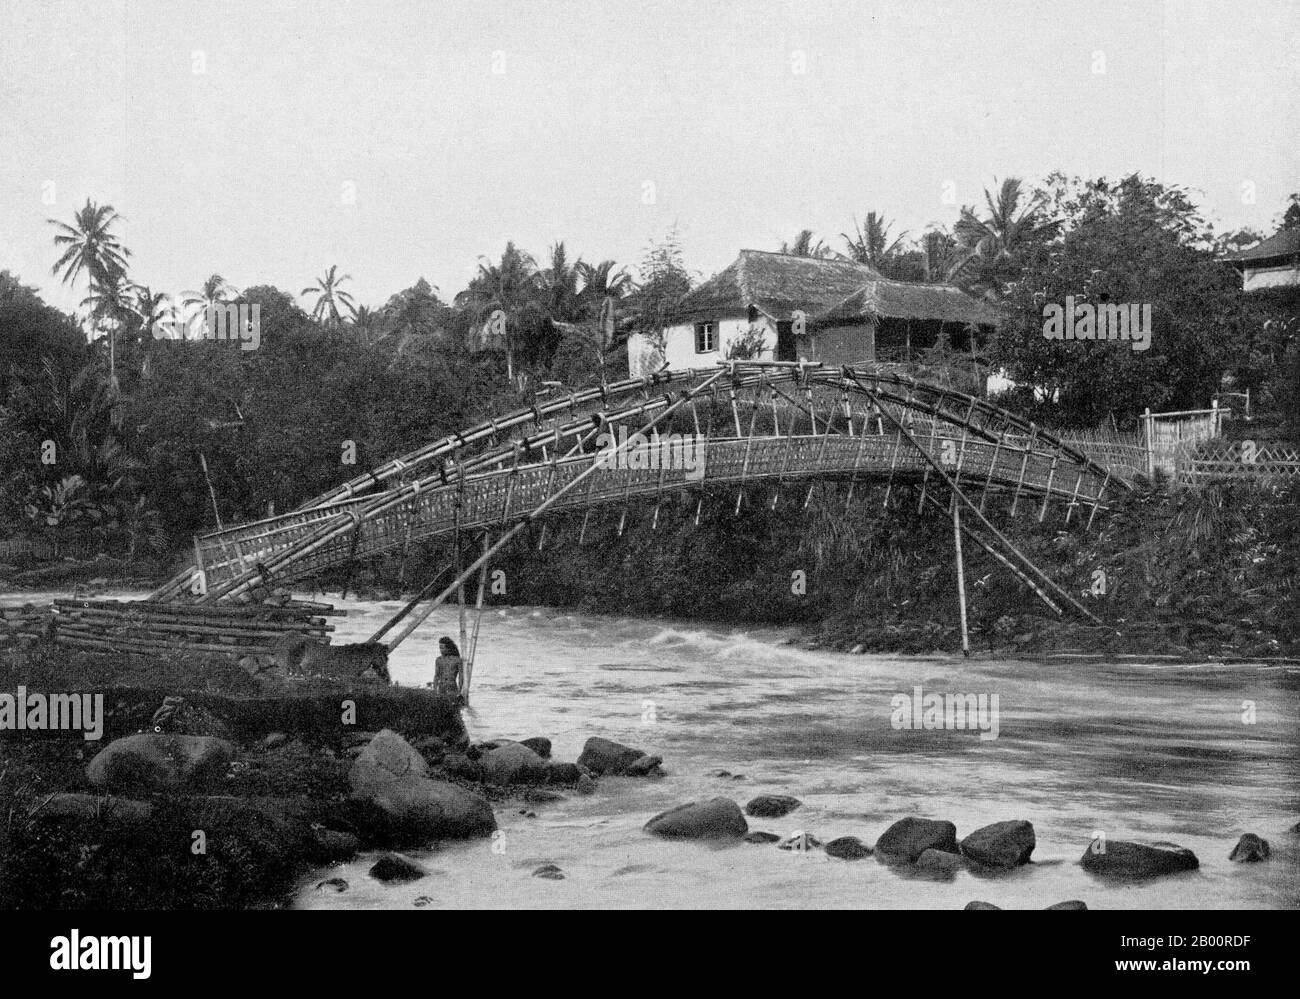 Indonesia/Germany: A bamboo bridge near Bogor, Java. Photograph by Ernst Haeckel (1834-1919), early 20th century.  Ernst Heinrich Philipp August Haeckel (February 16, 1834 – August 9, 1919), also written von Haeckel, was an eminent German biologist, naturalist, philosopher, physician, professor and artist who discovered, described and named thousands of new species, mapped a genealogical tree relating all life forms, and coined many terms in biology, including anthropogeny, ecology, phylum, phylogeny, and the kingdom Protista. Haeckel promoted and popularized Charles Darwin's work in Germany. Stock Photo